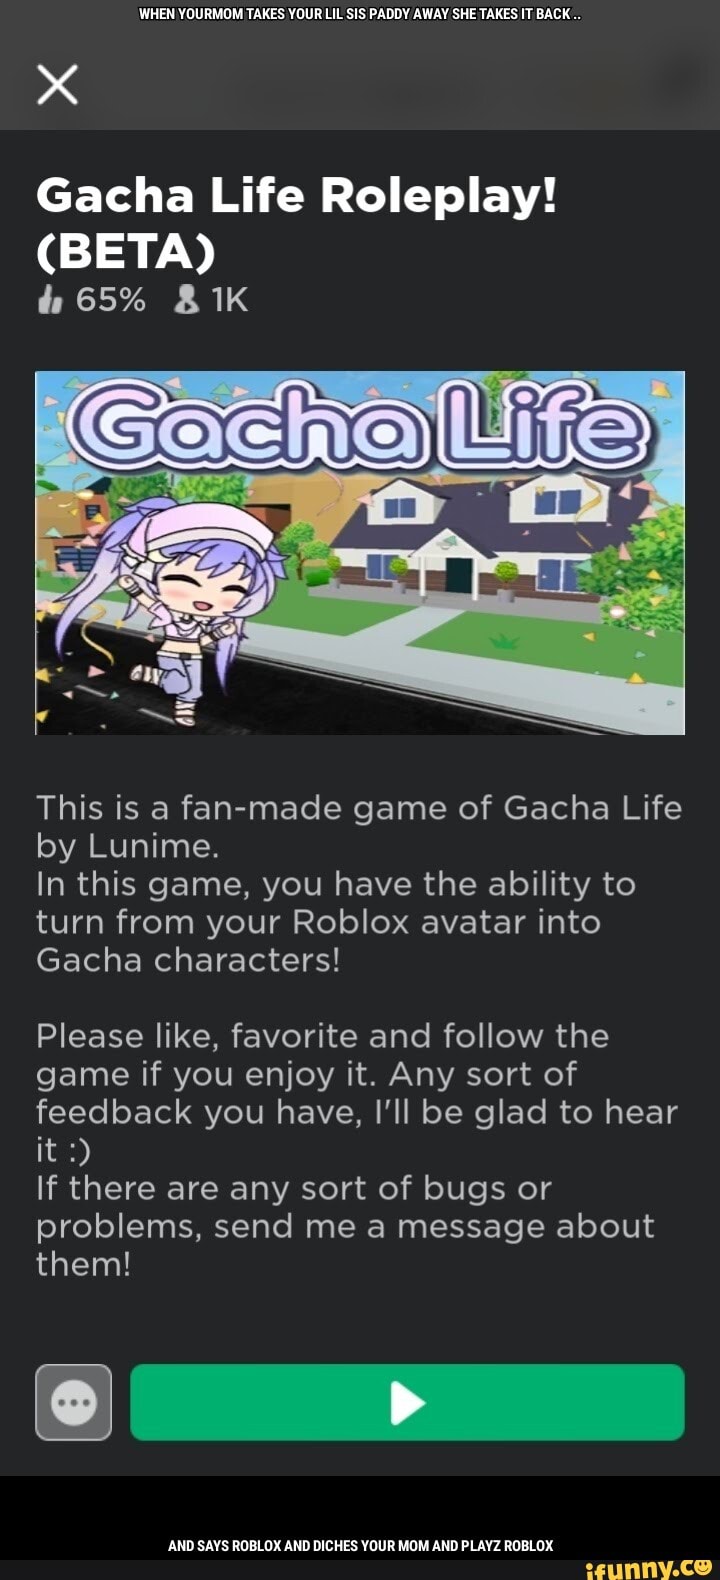 so theres a game in roblox for gacha life rp im fine